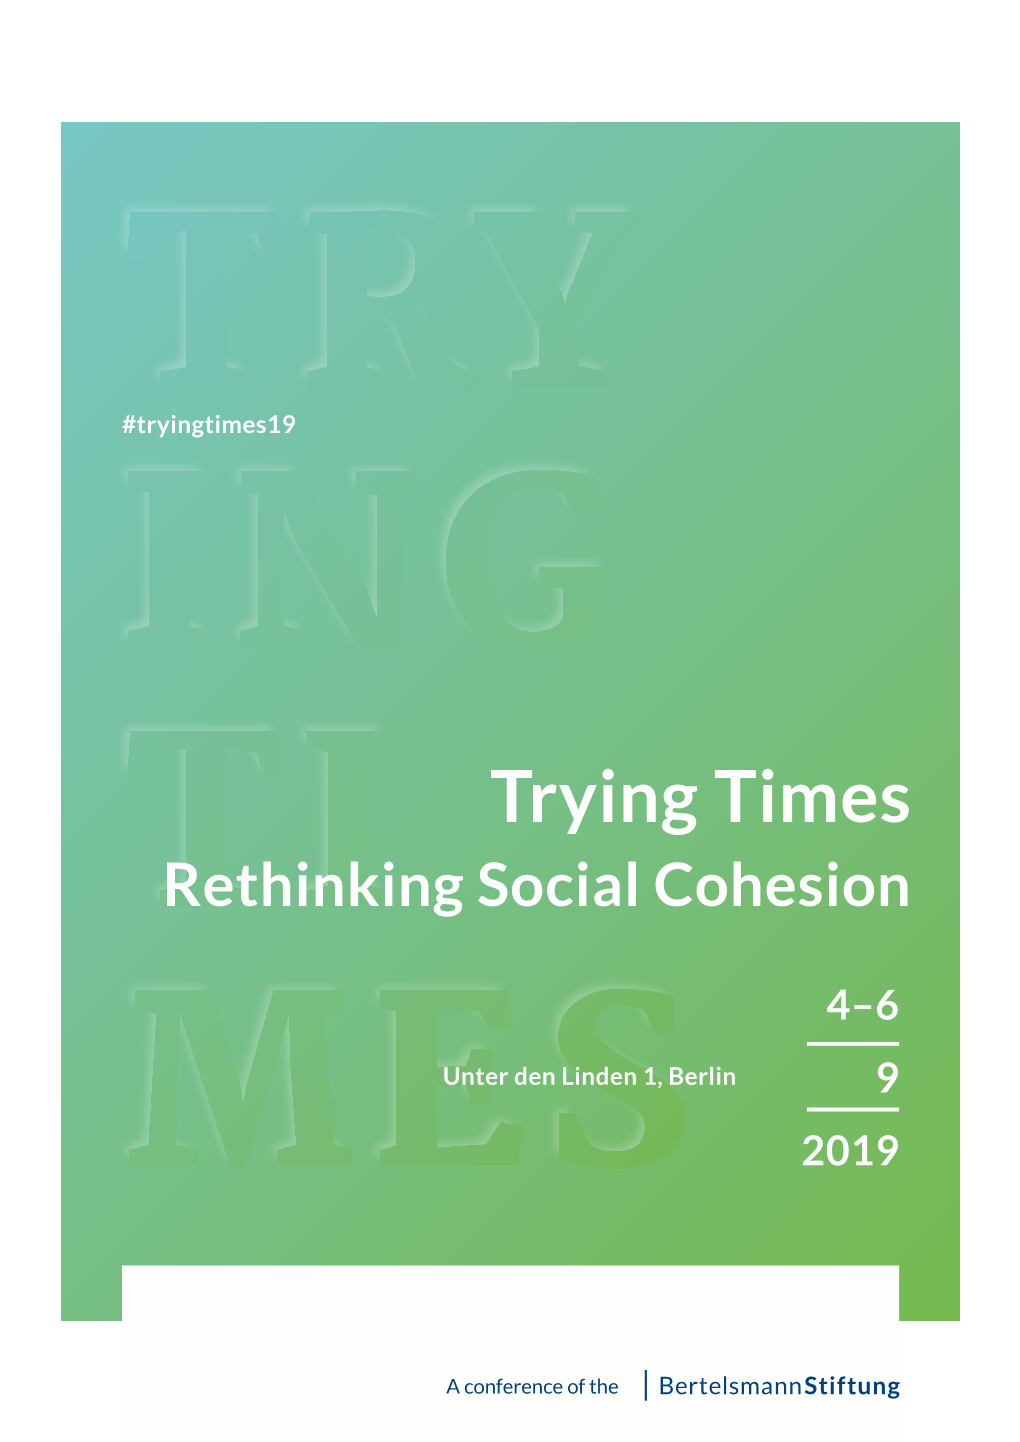 Trying Times 2019